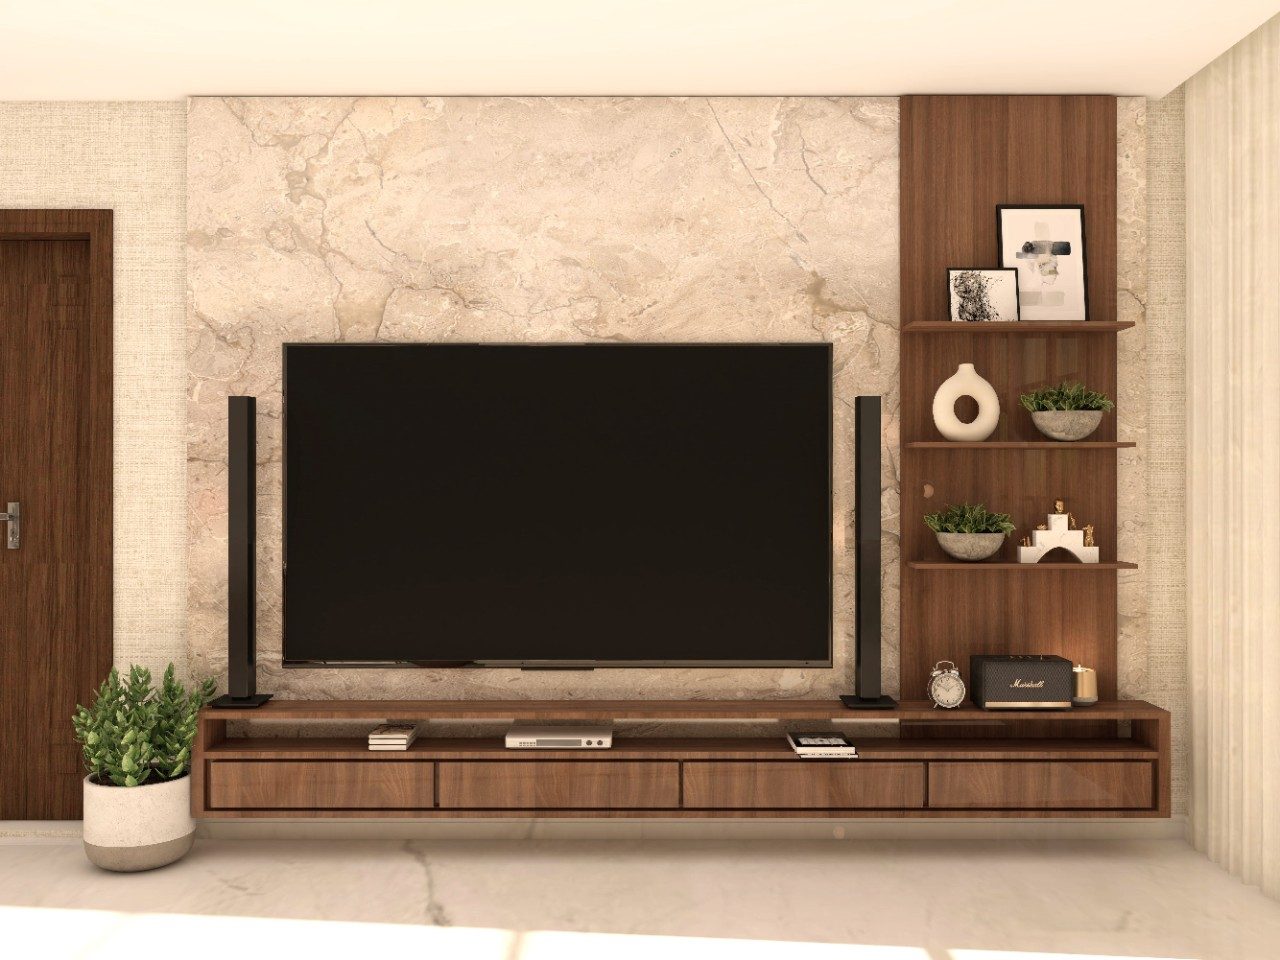 Wooden modular TV unit with marble wall tile-Beautiful Homes